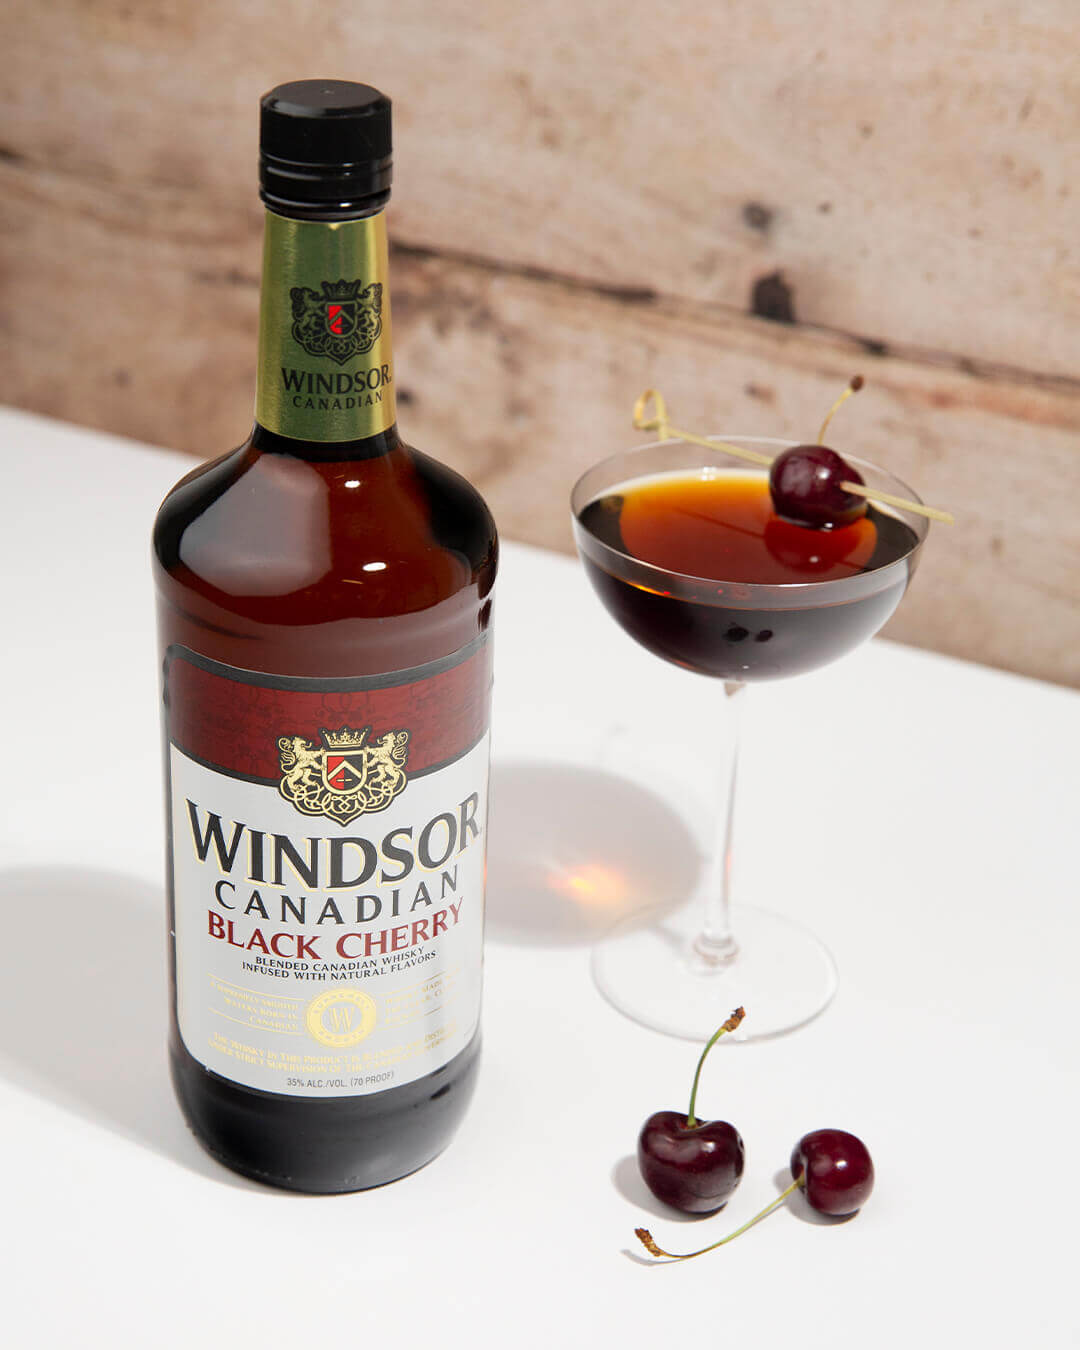 Windsor Canadian Black Cherry Manhattan Cocktail with a Black Cherry Bottle